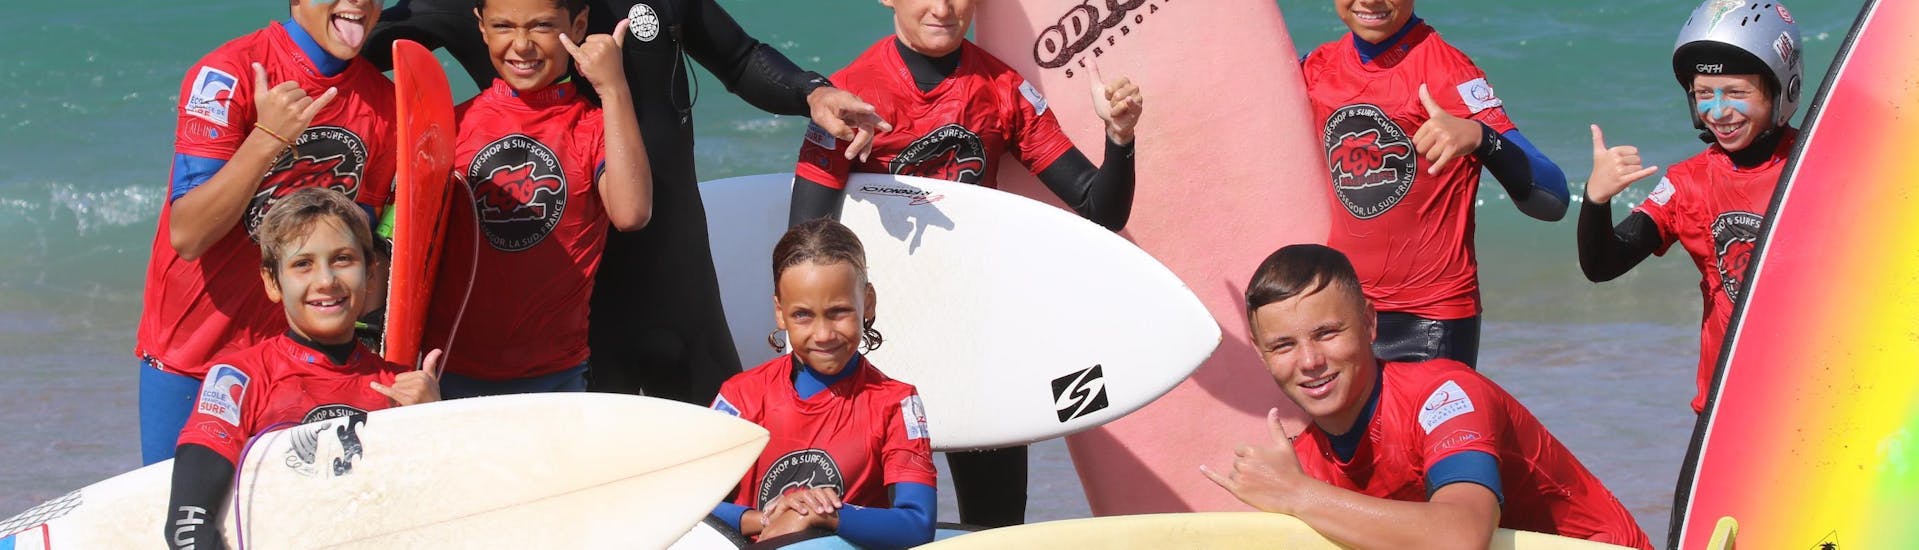 Children has a Surfing Lessonson the Plage Sud in Hossegor in Low Season with their instructor from Tao Magic Glisse.